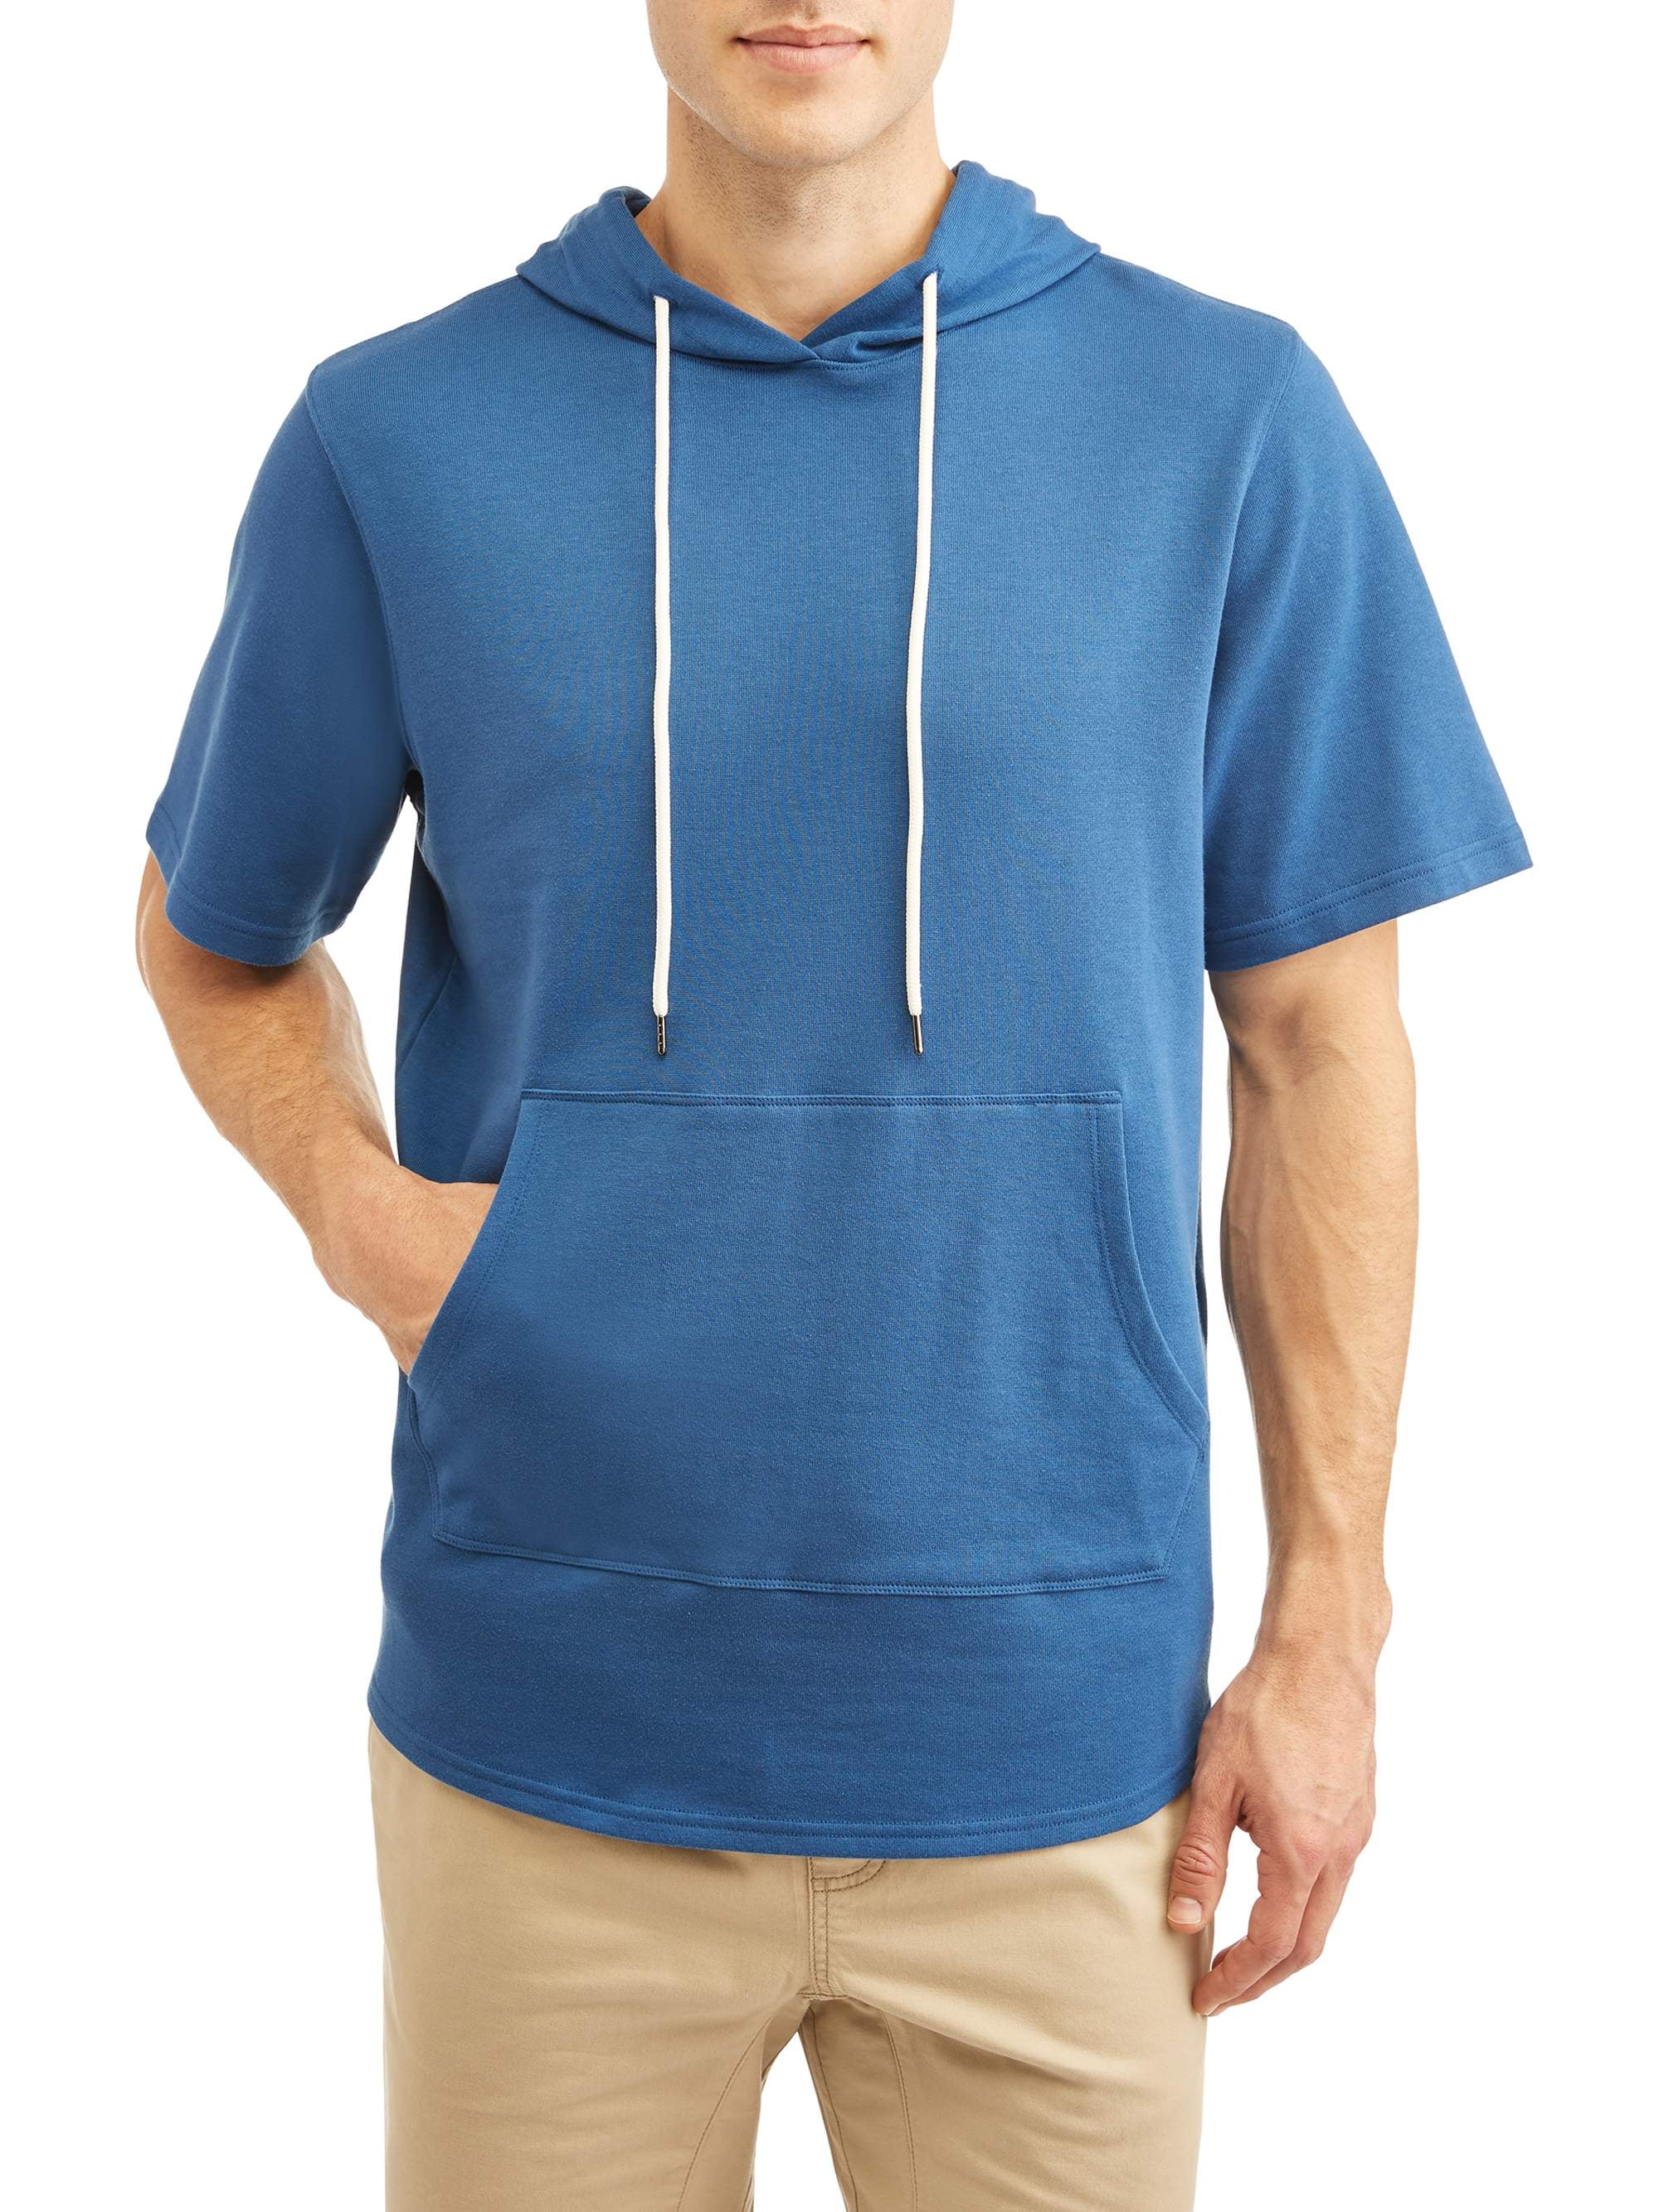 George Men's Elongated Short Sleeve Hoodie, Up to size 2XL 